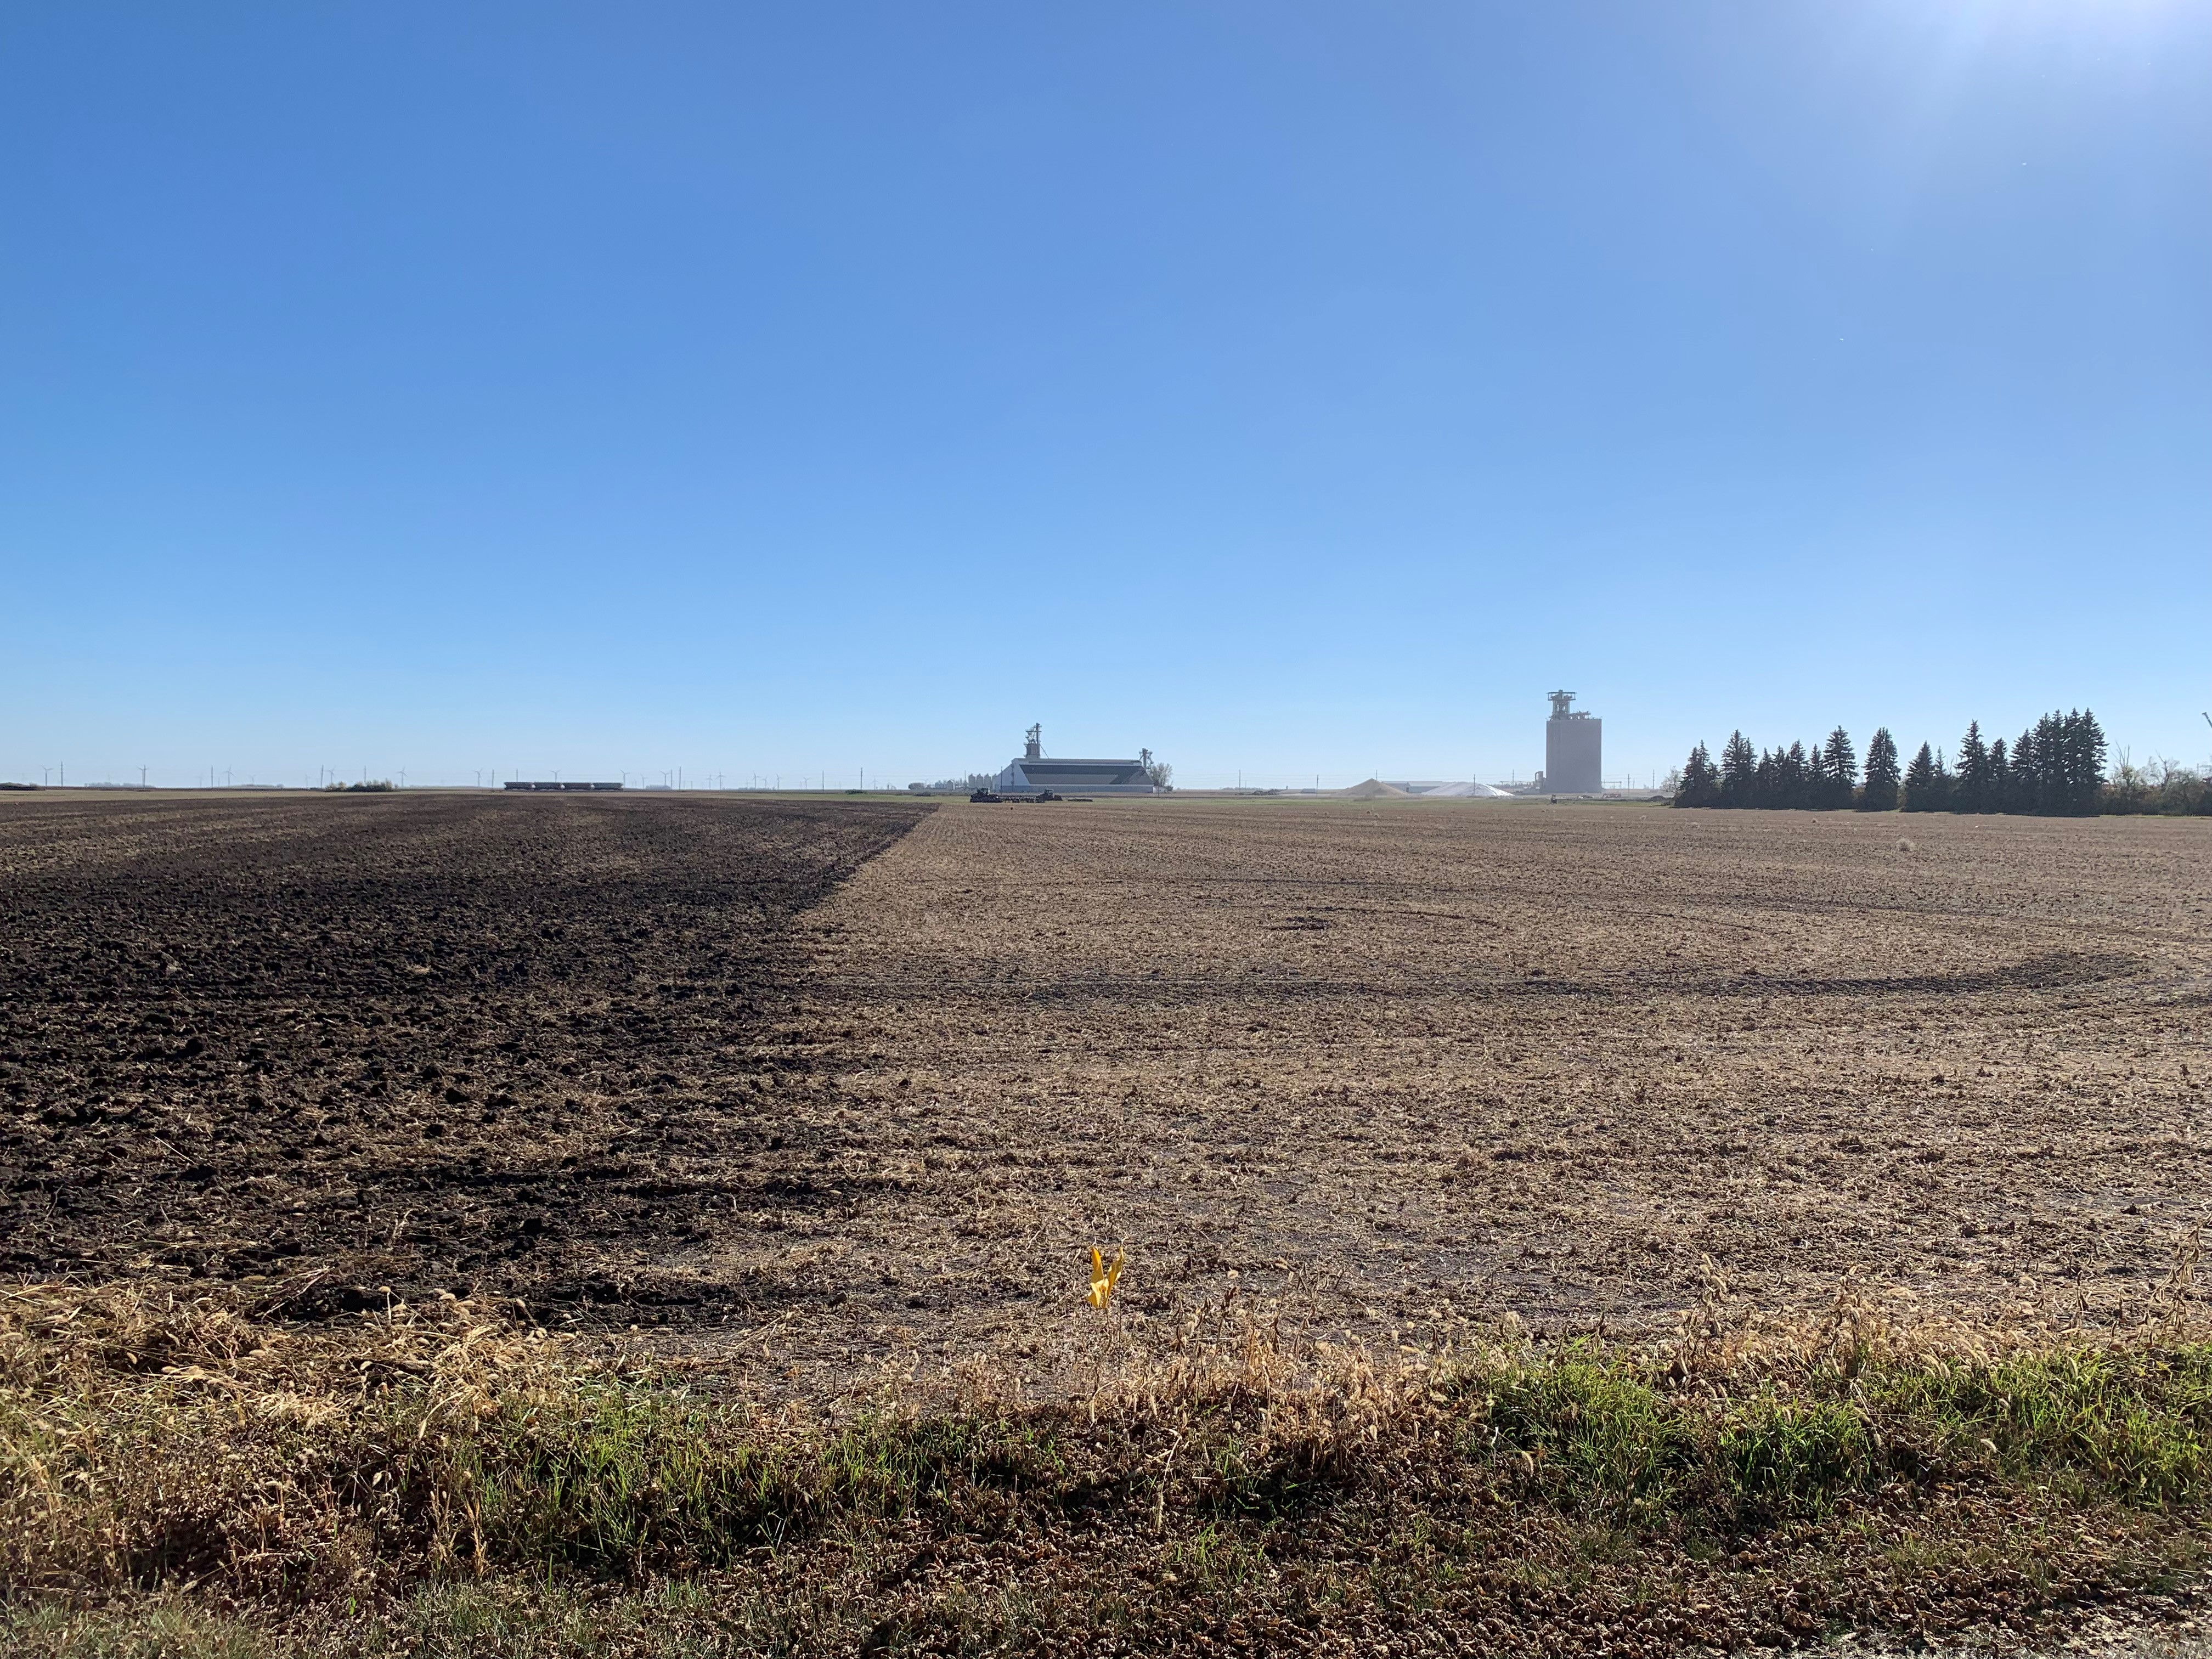 The Langdon Research Extension Center conventional-till versus no-till demonstration site on October 6, 2021.